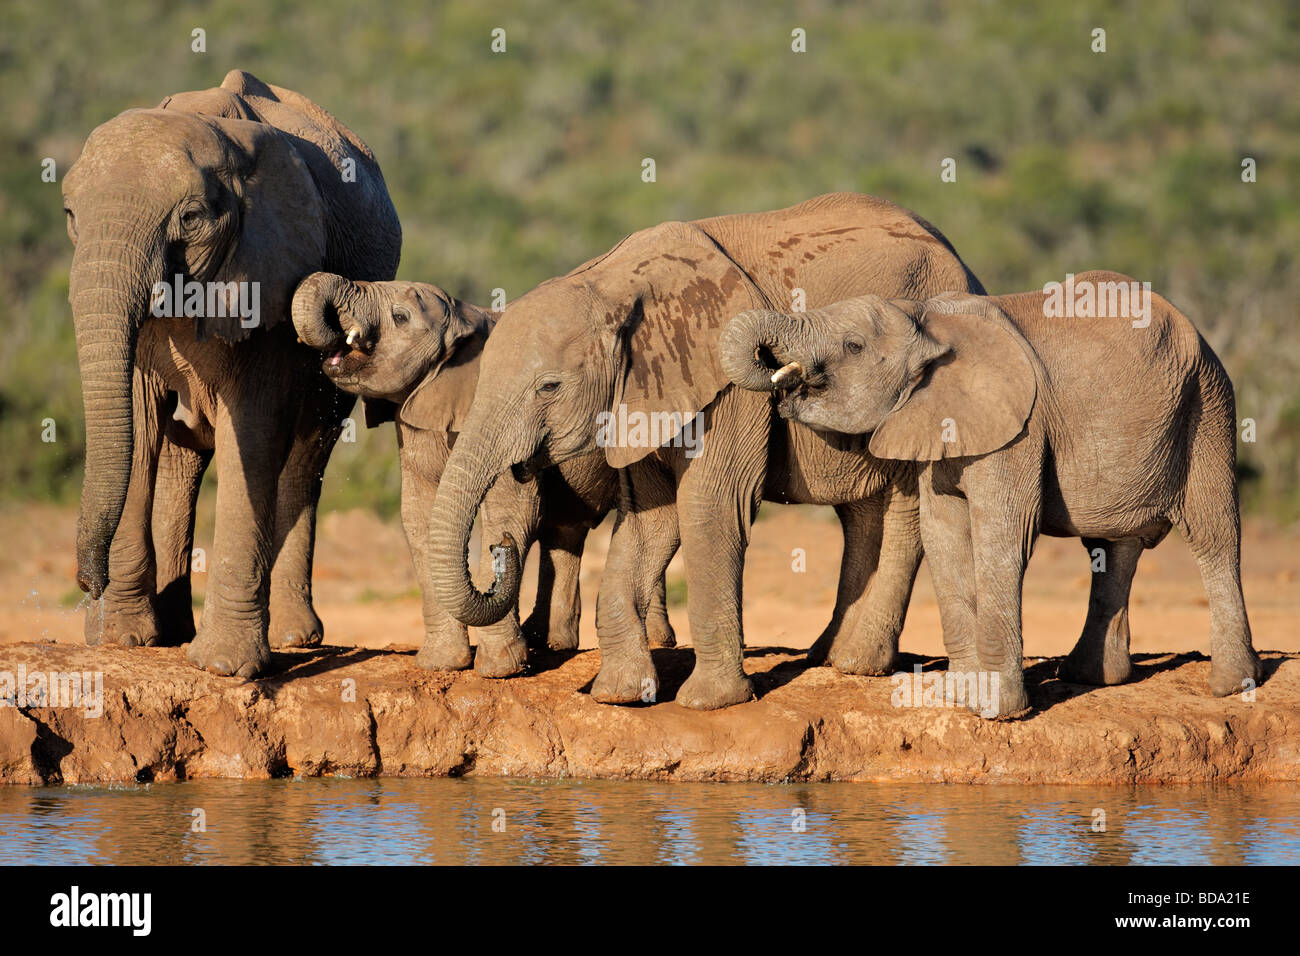 African elephants (Loxodonta africana) drinking water at a waterhole, Addo National Park, South Africa Stock Photo